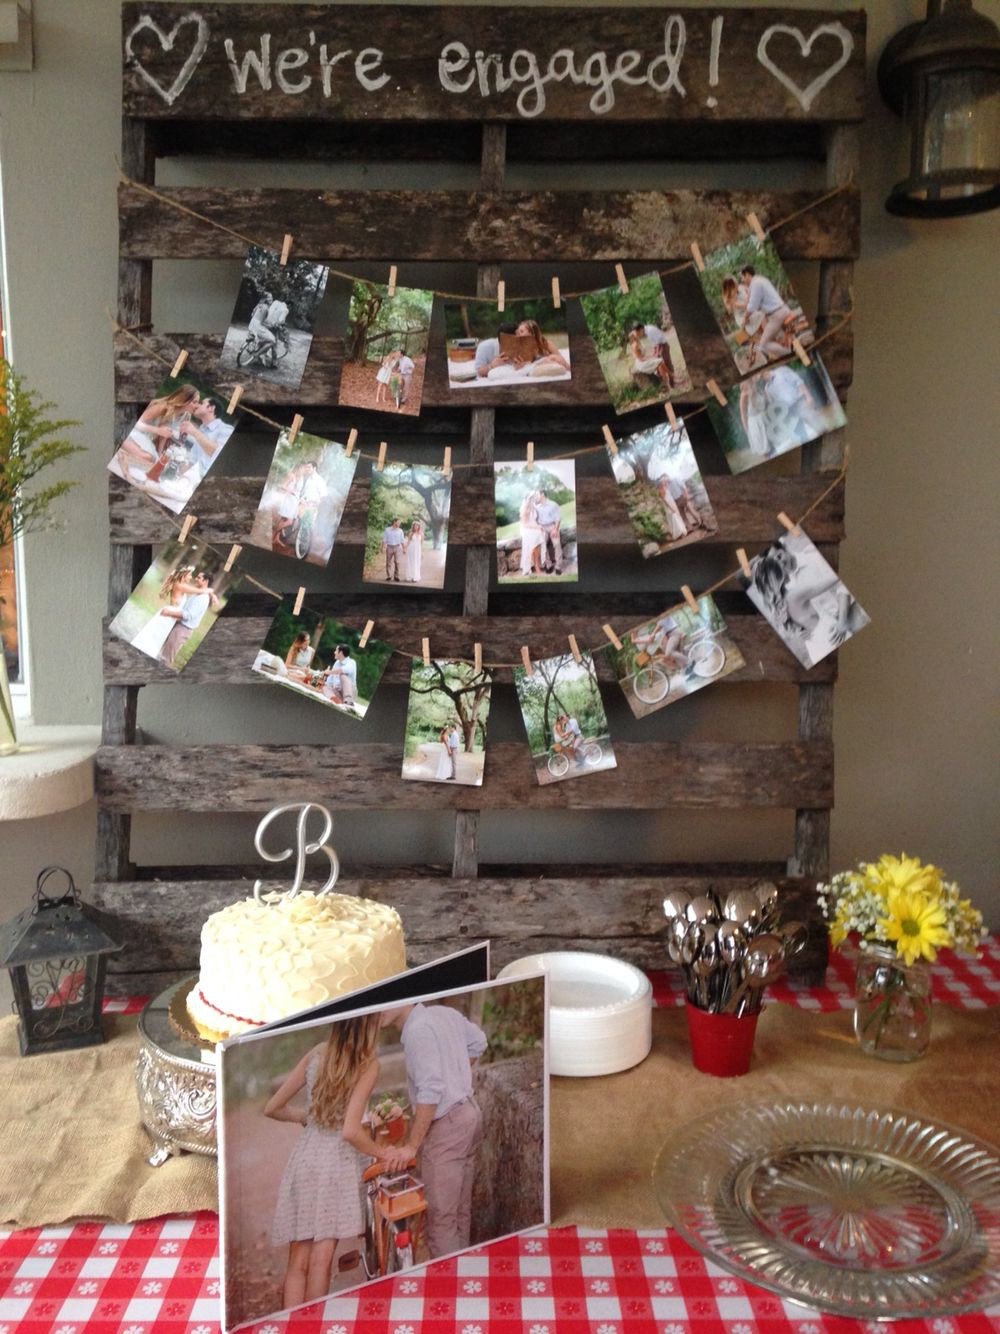 Engagement Party Ideas For Home
 I do BBQ …